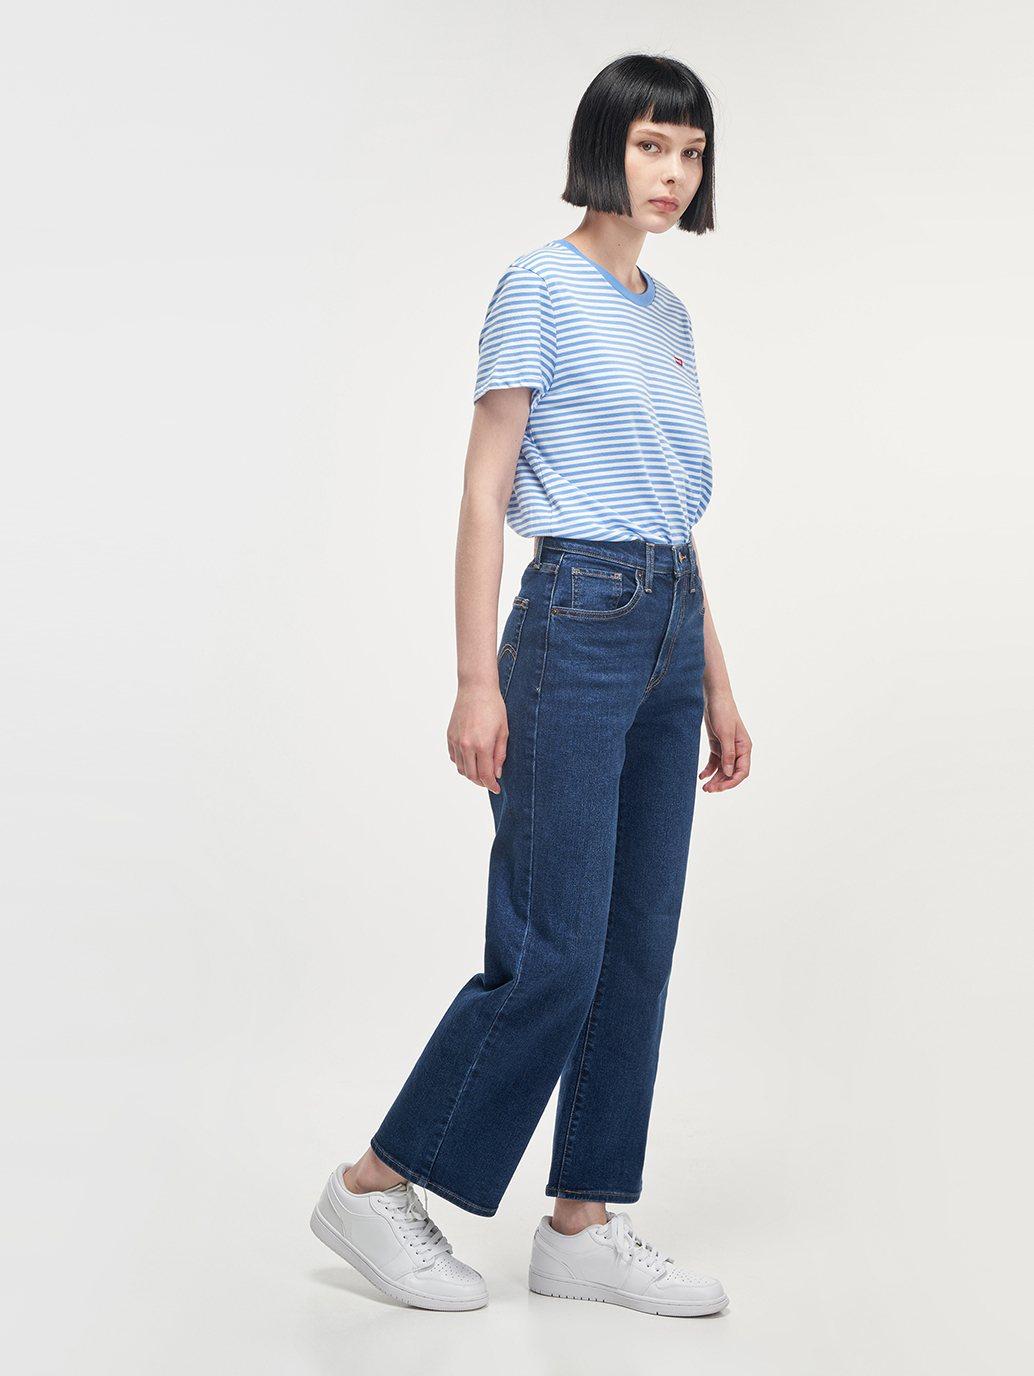 levis malaysia womens high waisted cropped flare jeans A09670004 03 Side